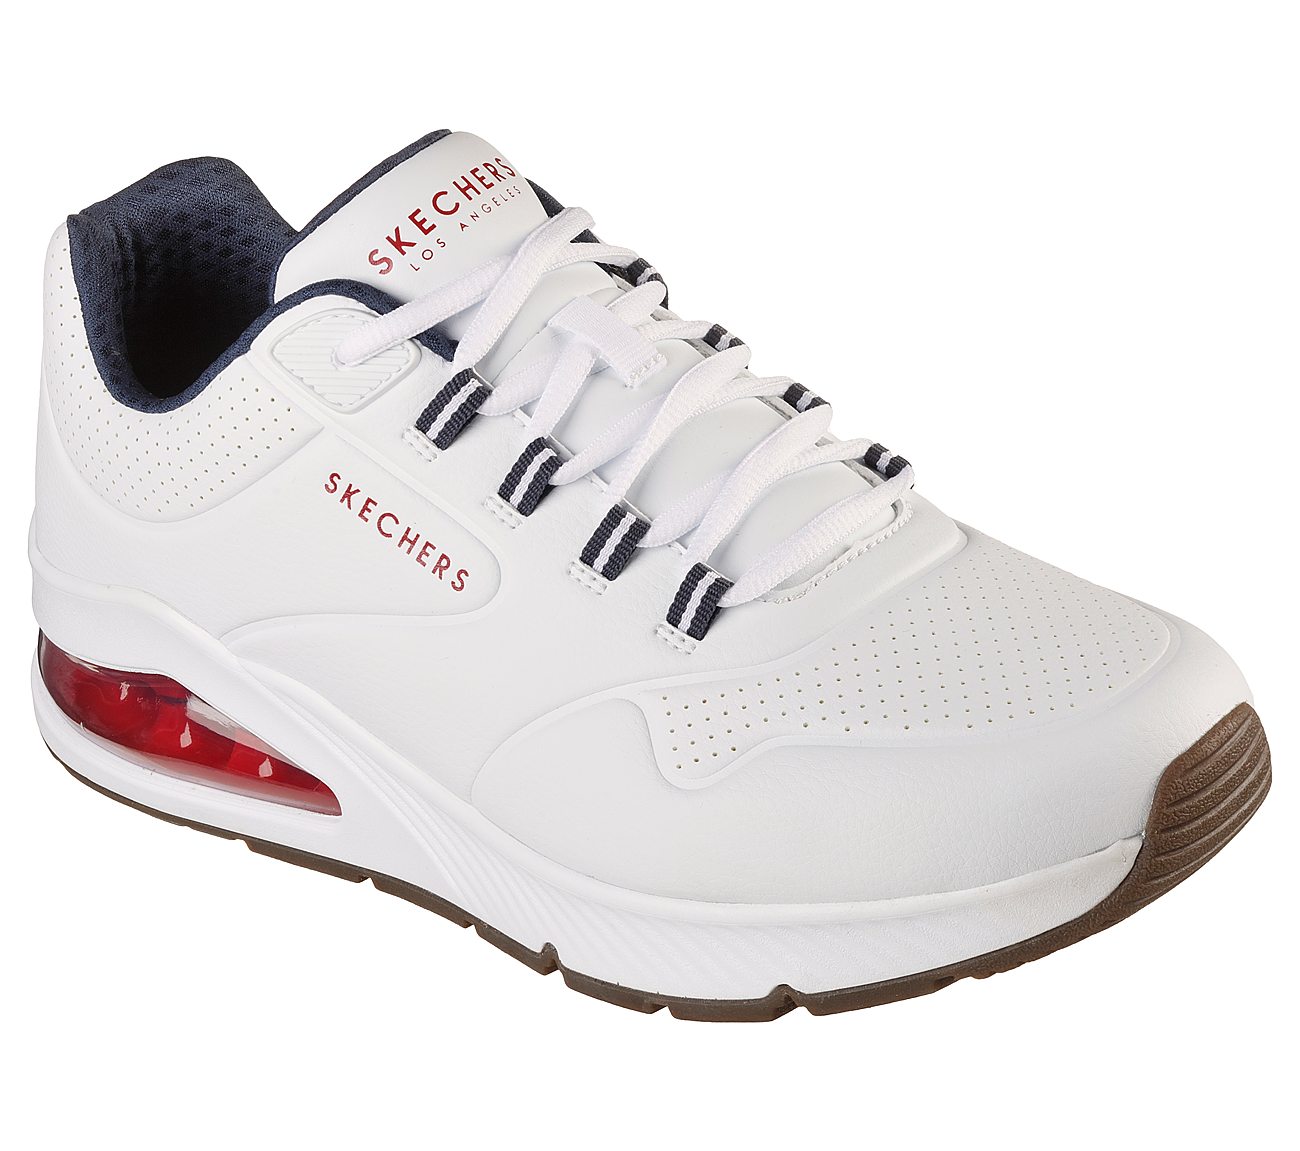 UNO 2, WHITE/NAVY/RED Footwear Lateral View